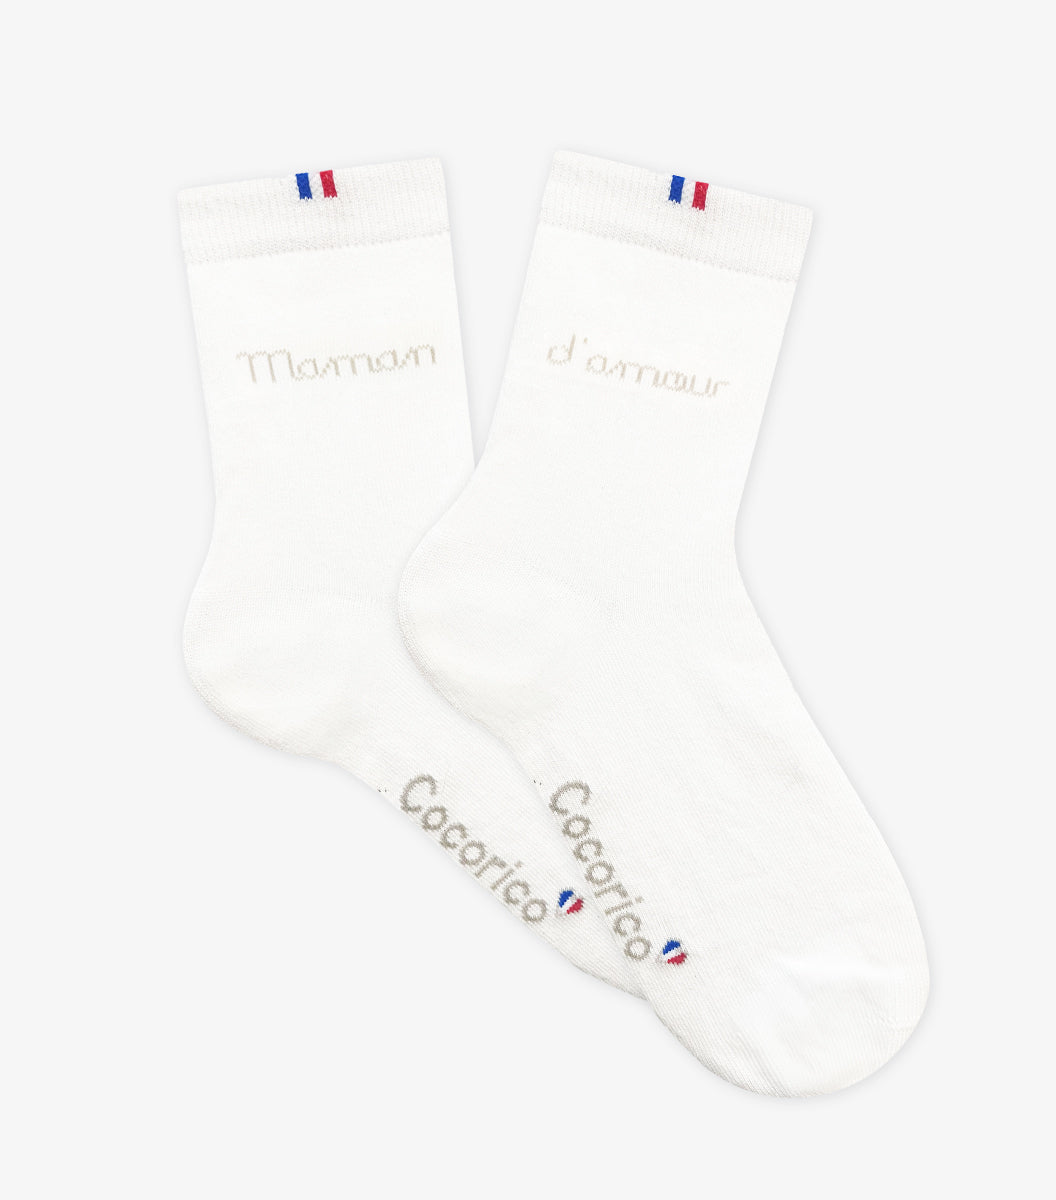 Chaussettes Femme Blanc - Maman d'Amour (Or)